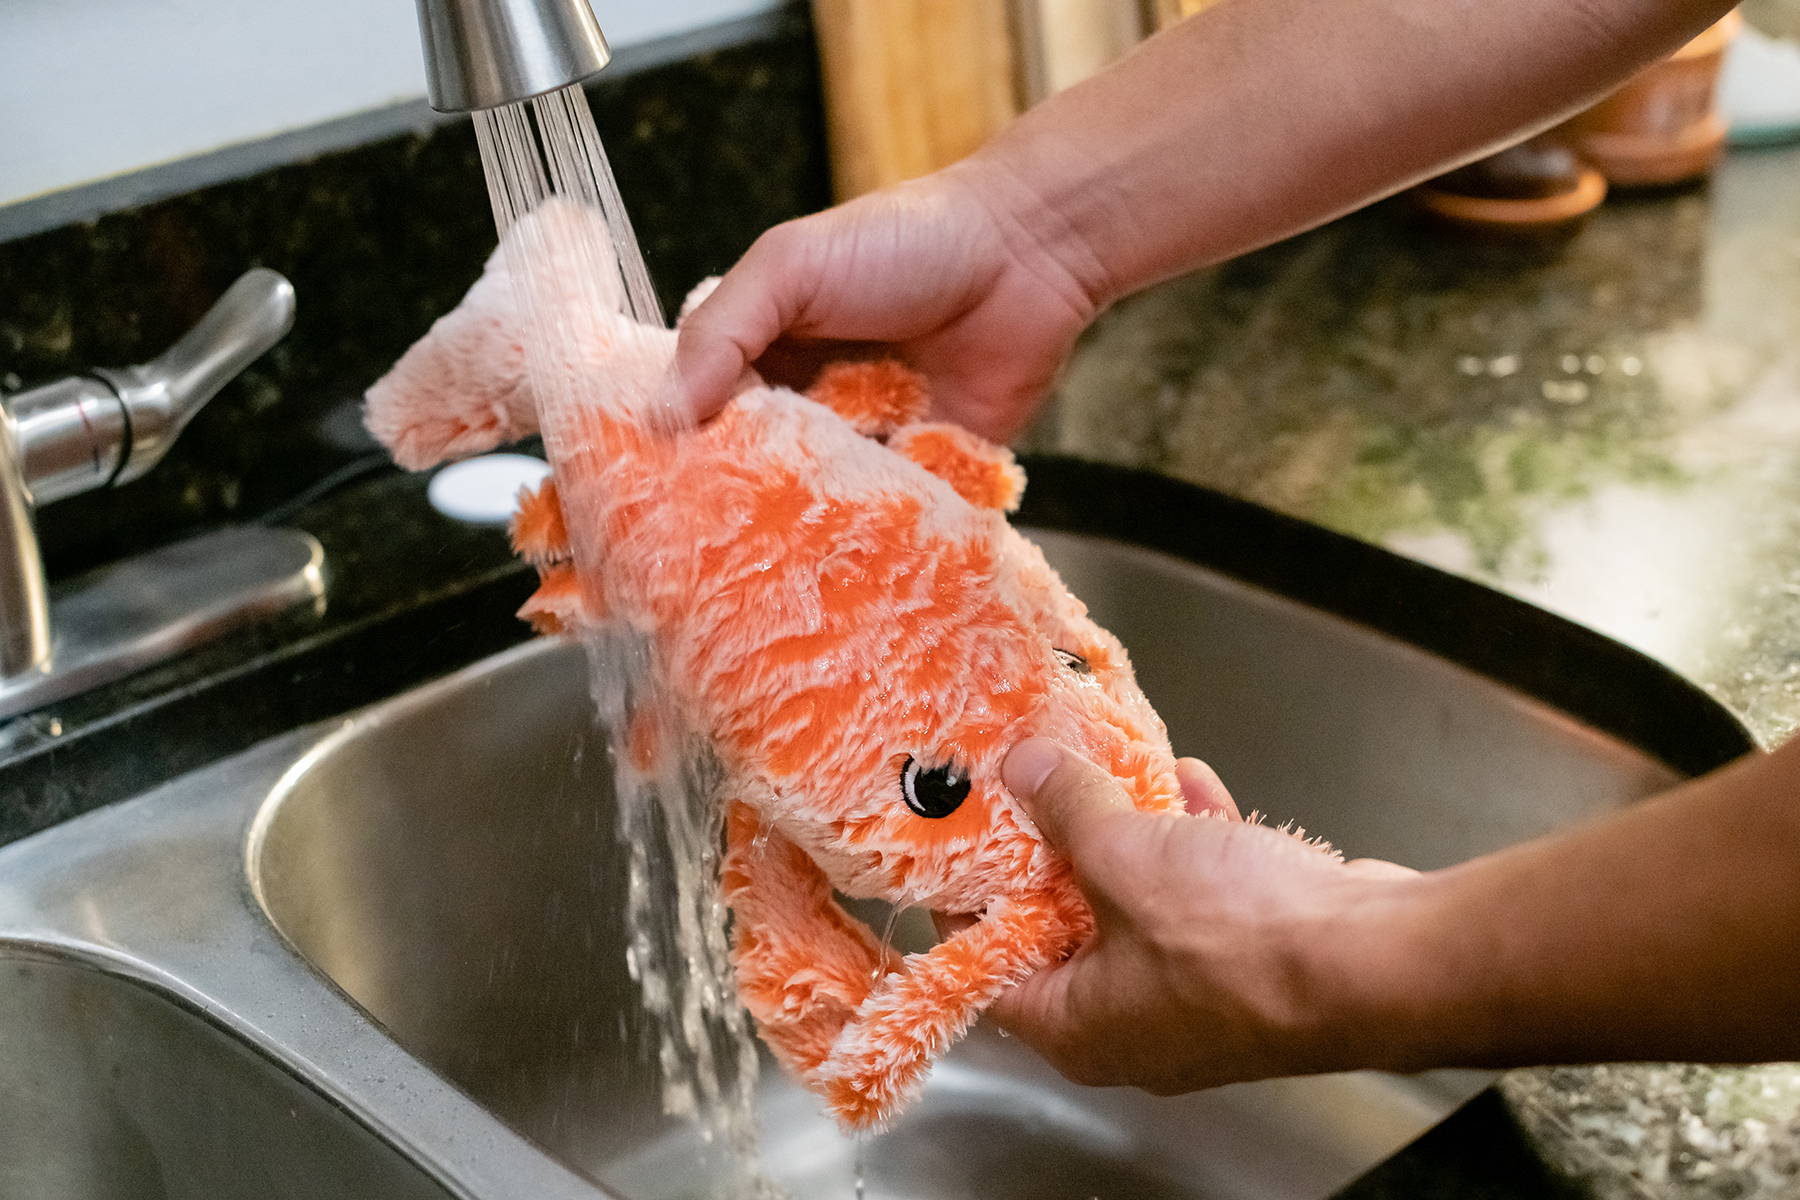 oop pouch, remove the power box, hand wash your cats toys in warm water, and let them air dry.